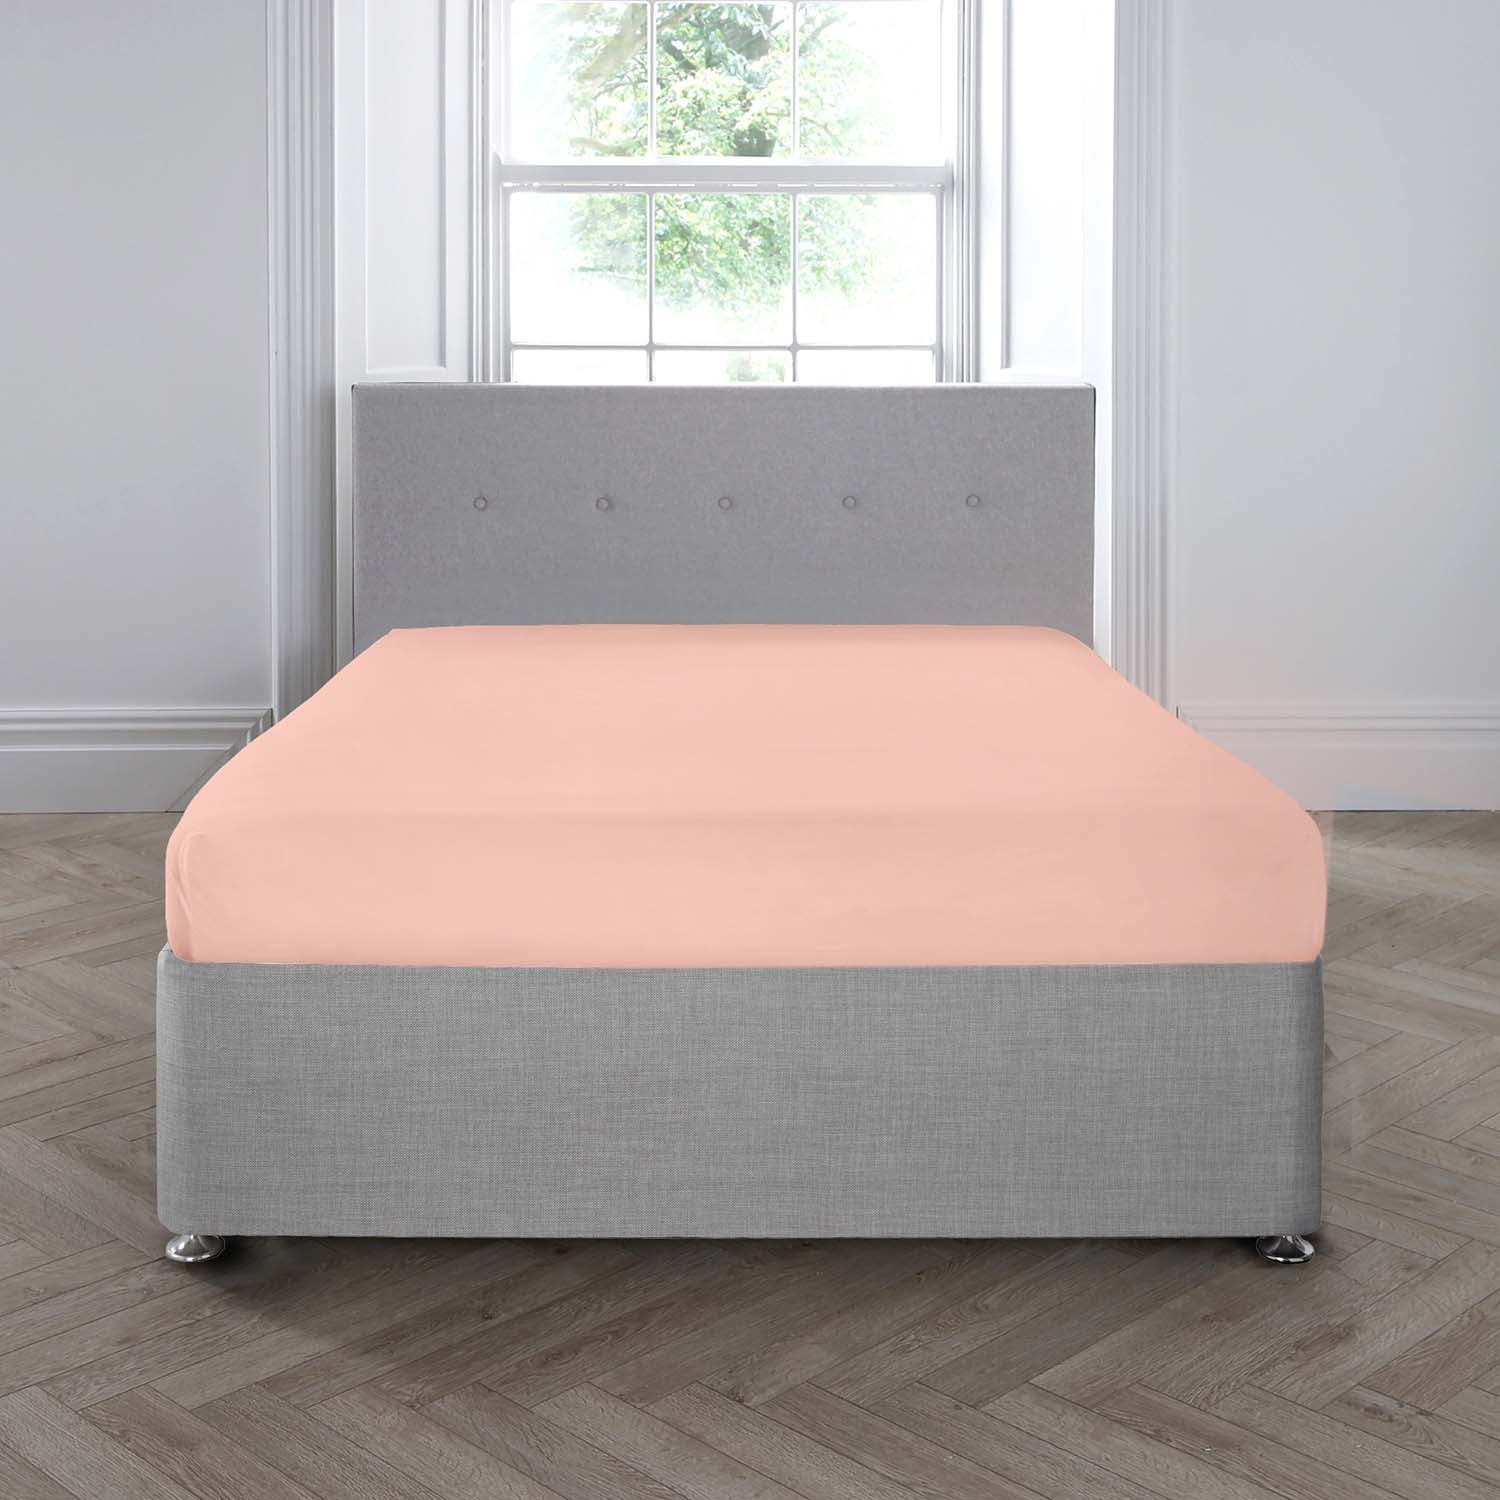 Appletree 200 TC 100% Cotton Extra Deep Fitted Sheet - Blush 1 Shaws Department Stores